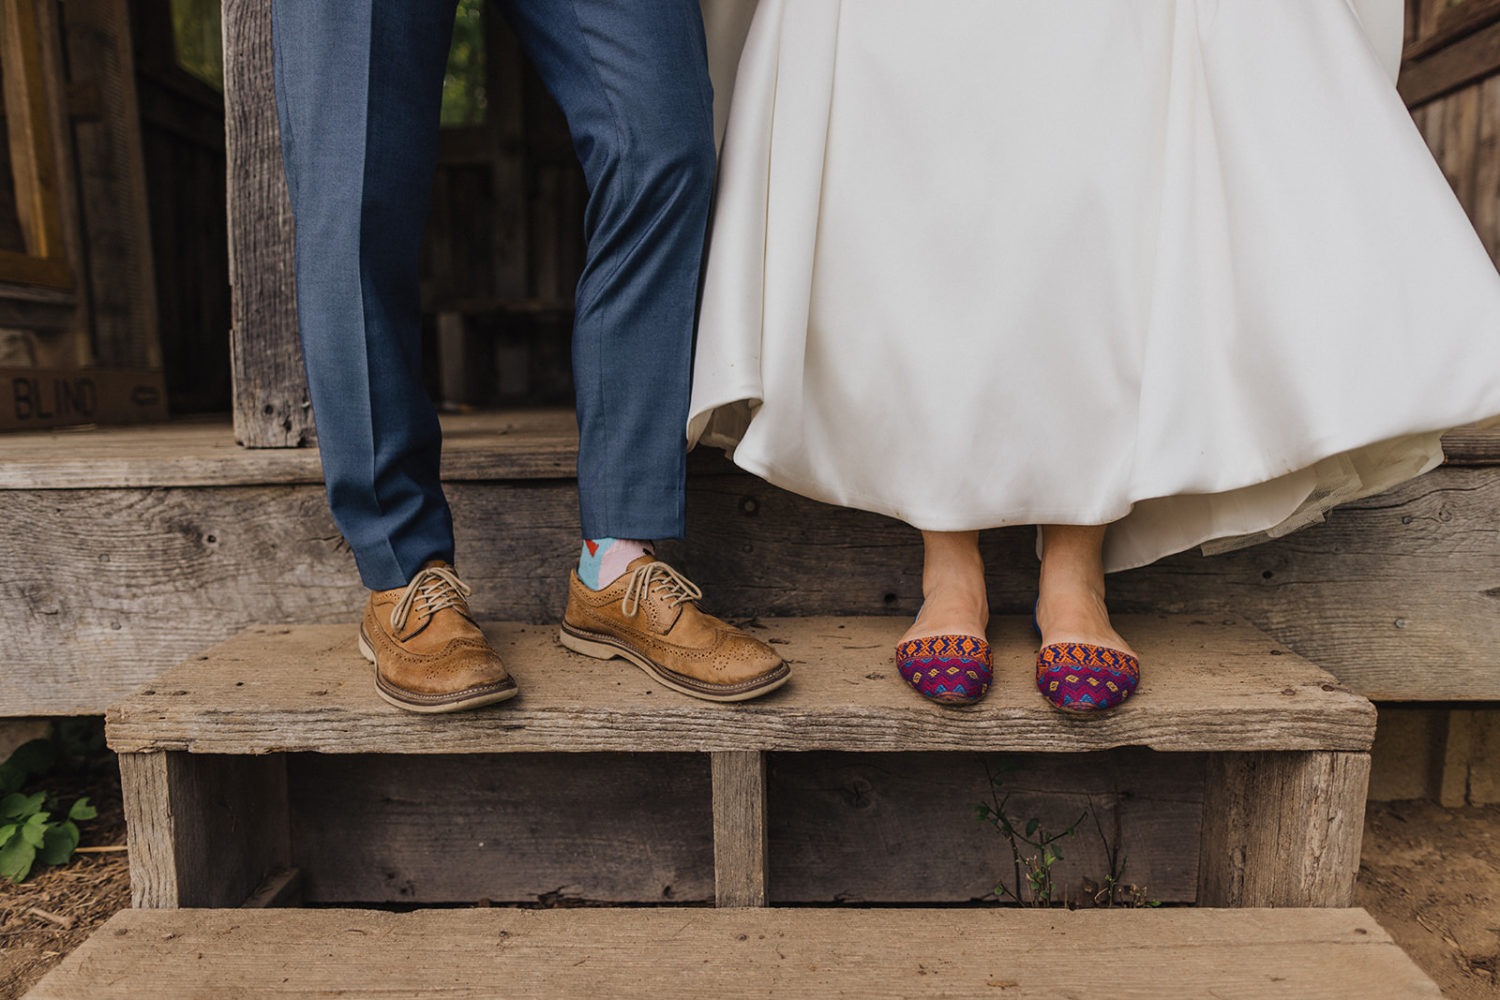 Bride and groom shoe off their colorful wedding shoes and socks